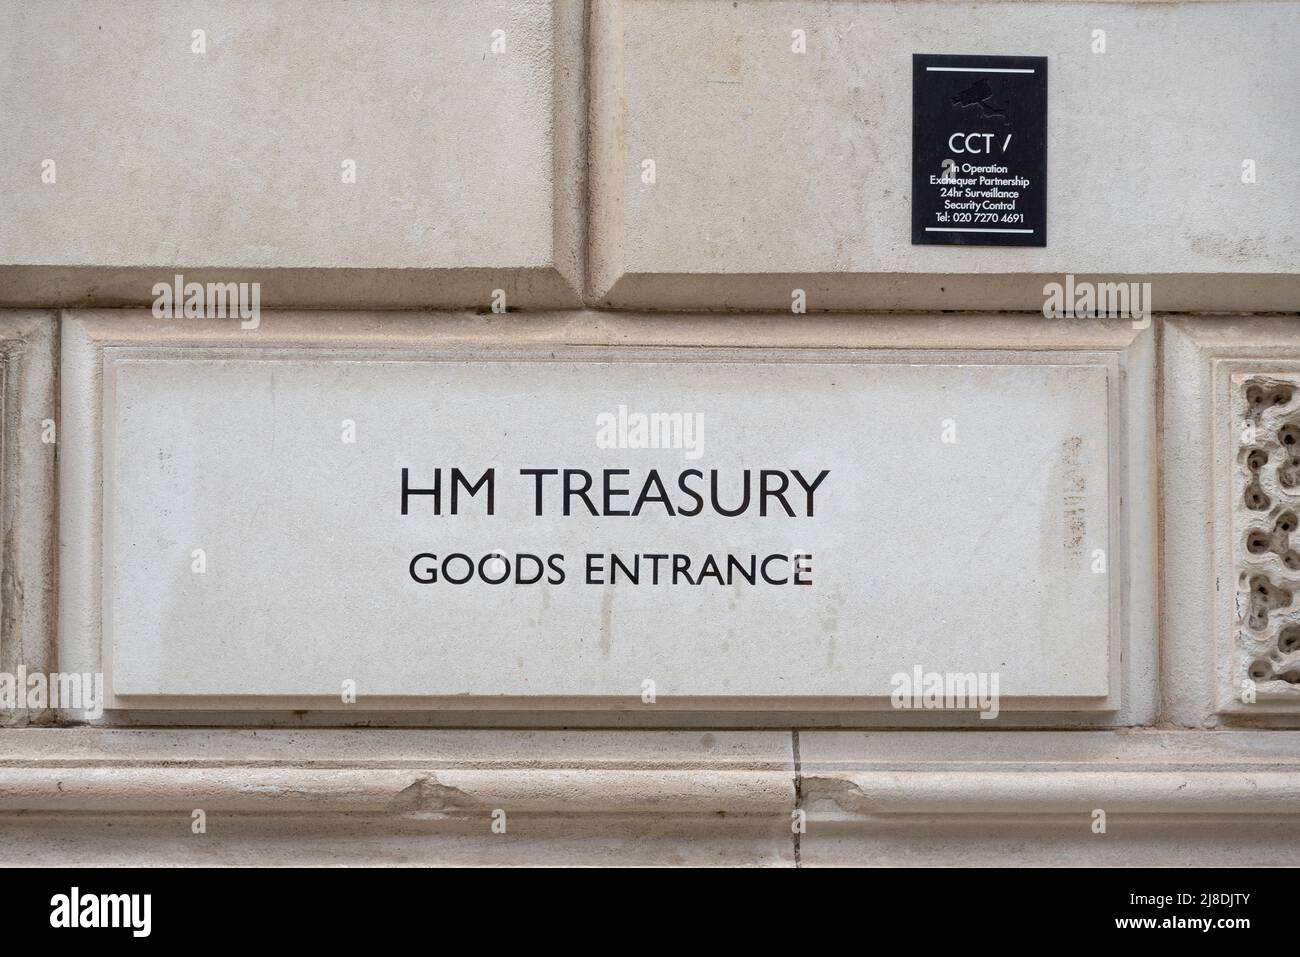 HM Treasury, goods entrance, carved stone sign. Her Majesty's Treasury government department, with CCTV security notice Stock Photo